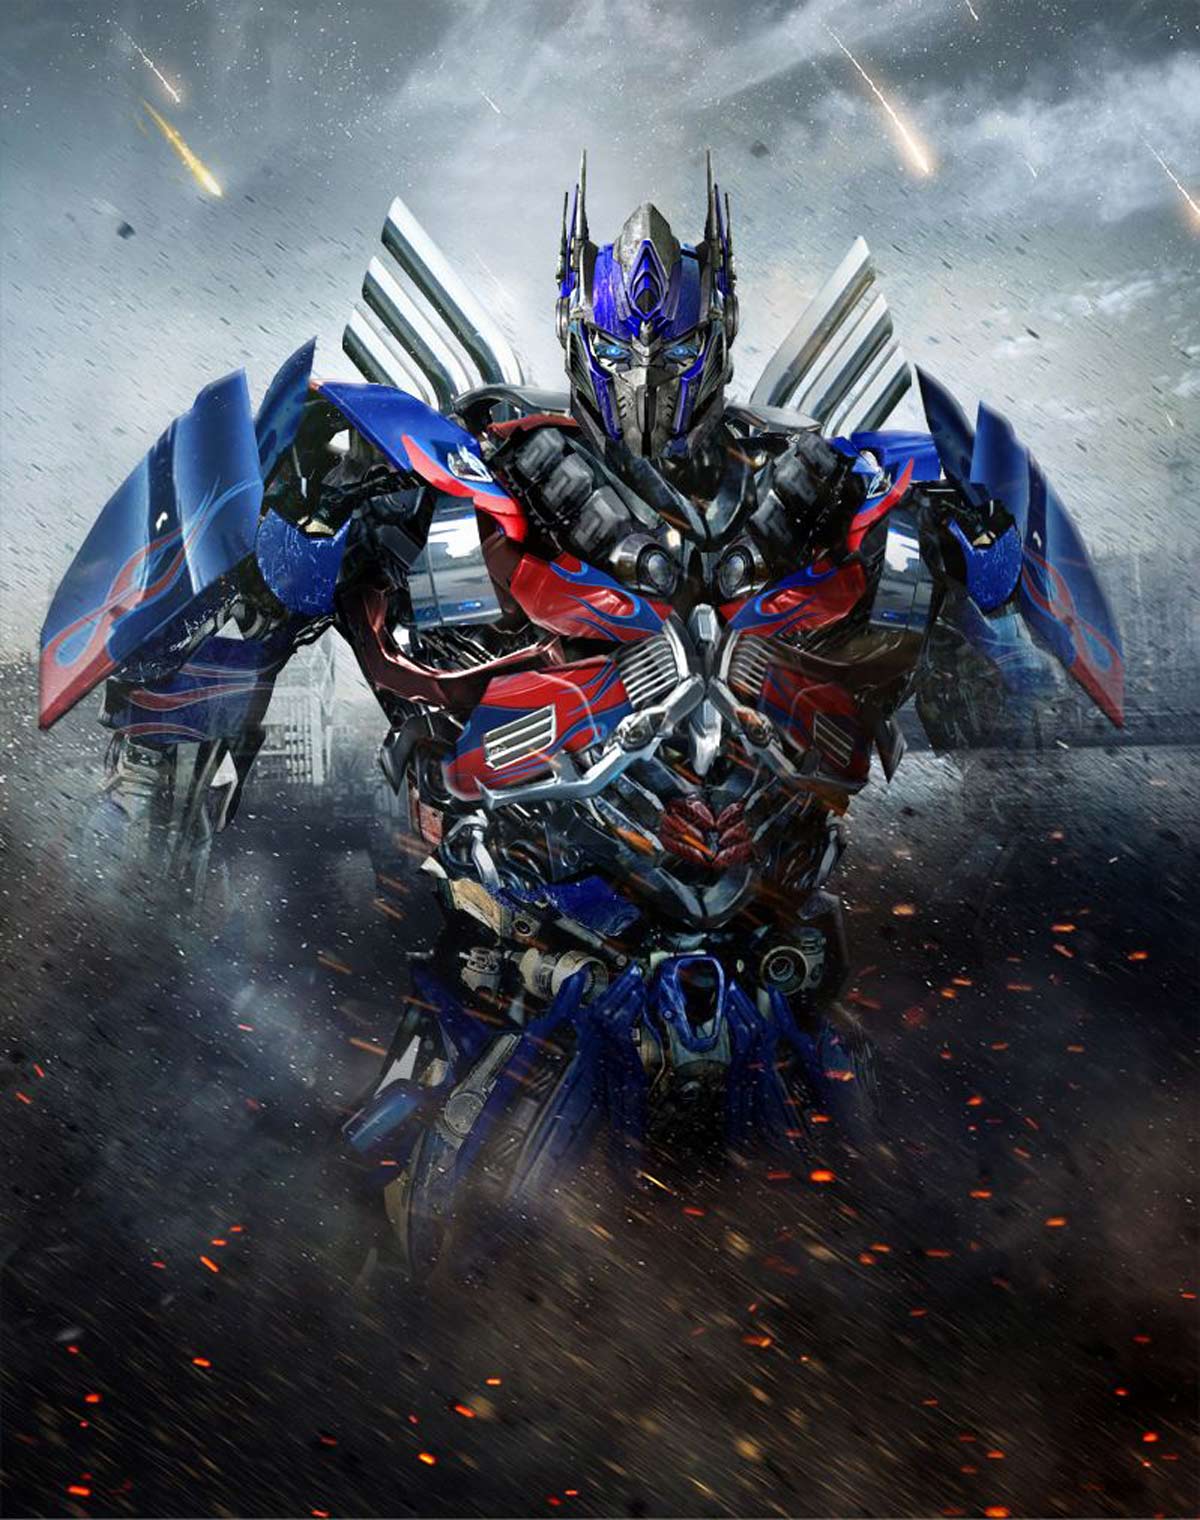 transformers live wallpaper,transformers,fictional character,warlord,cg artwork,pc game